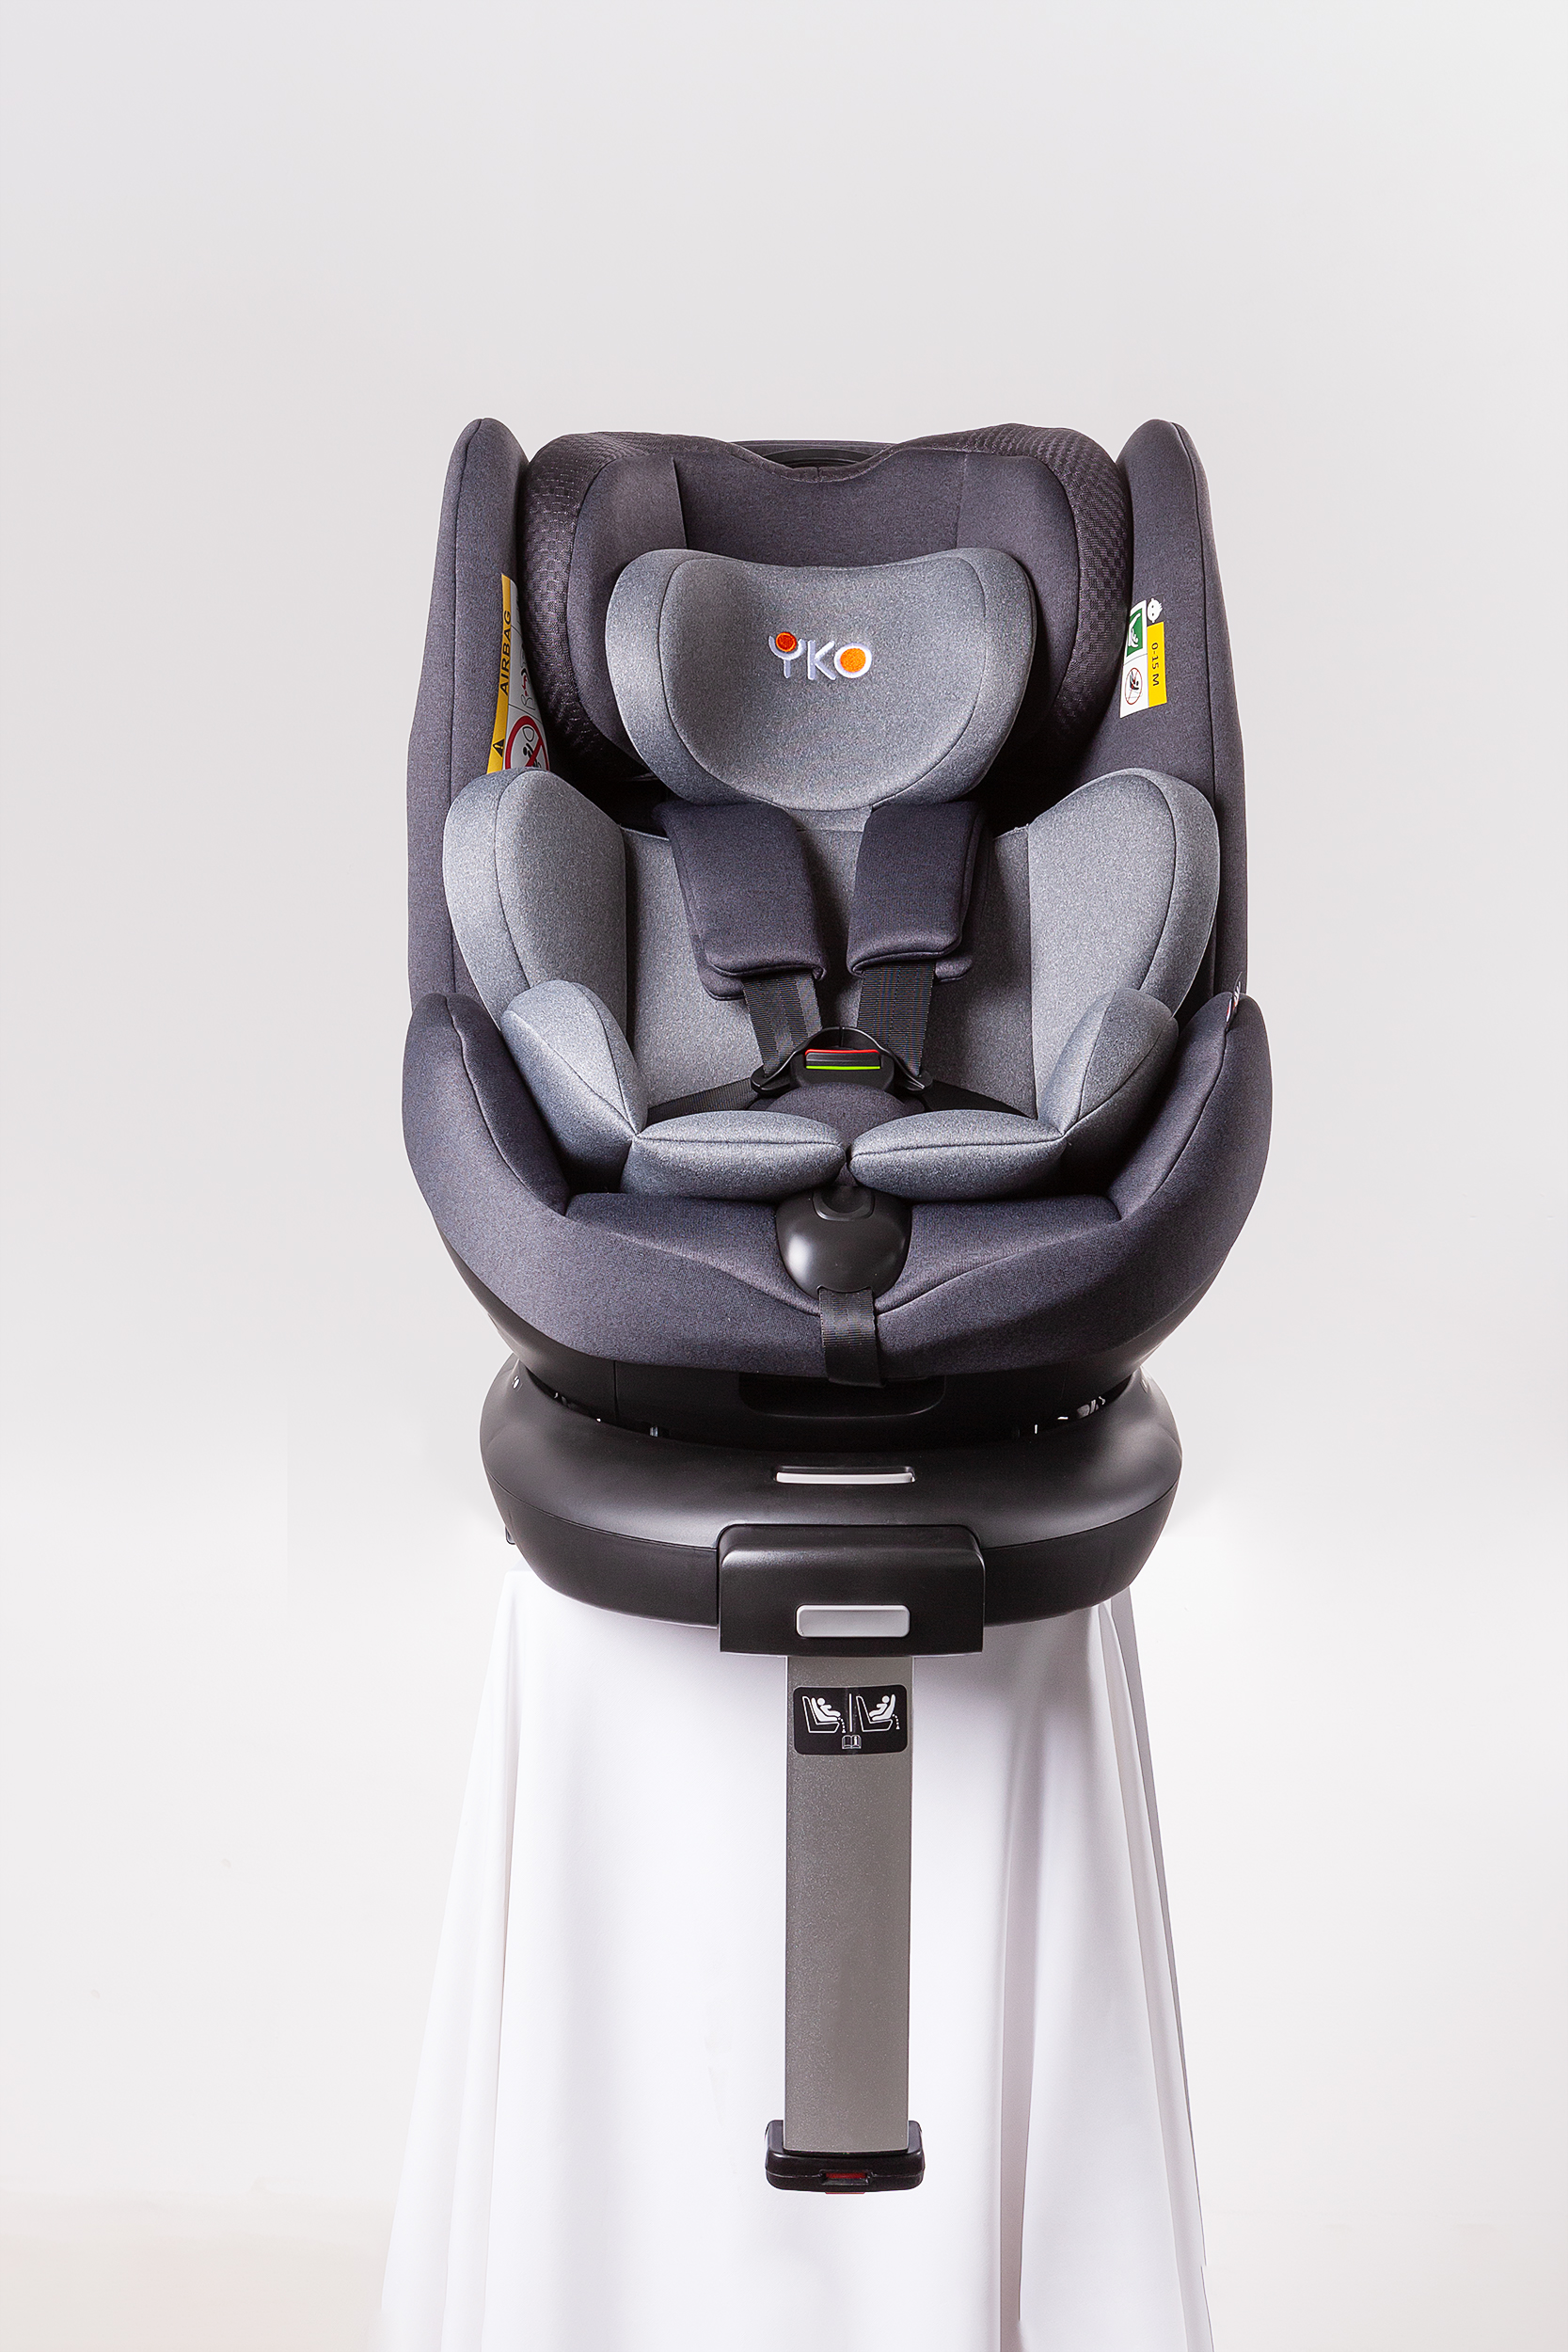 Brown Europe Standard Child Car Seat for Sale in Germany